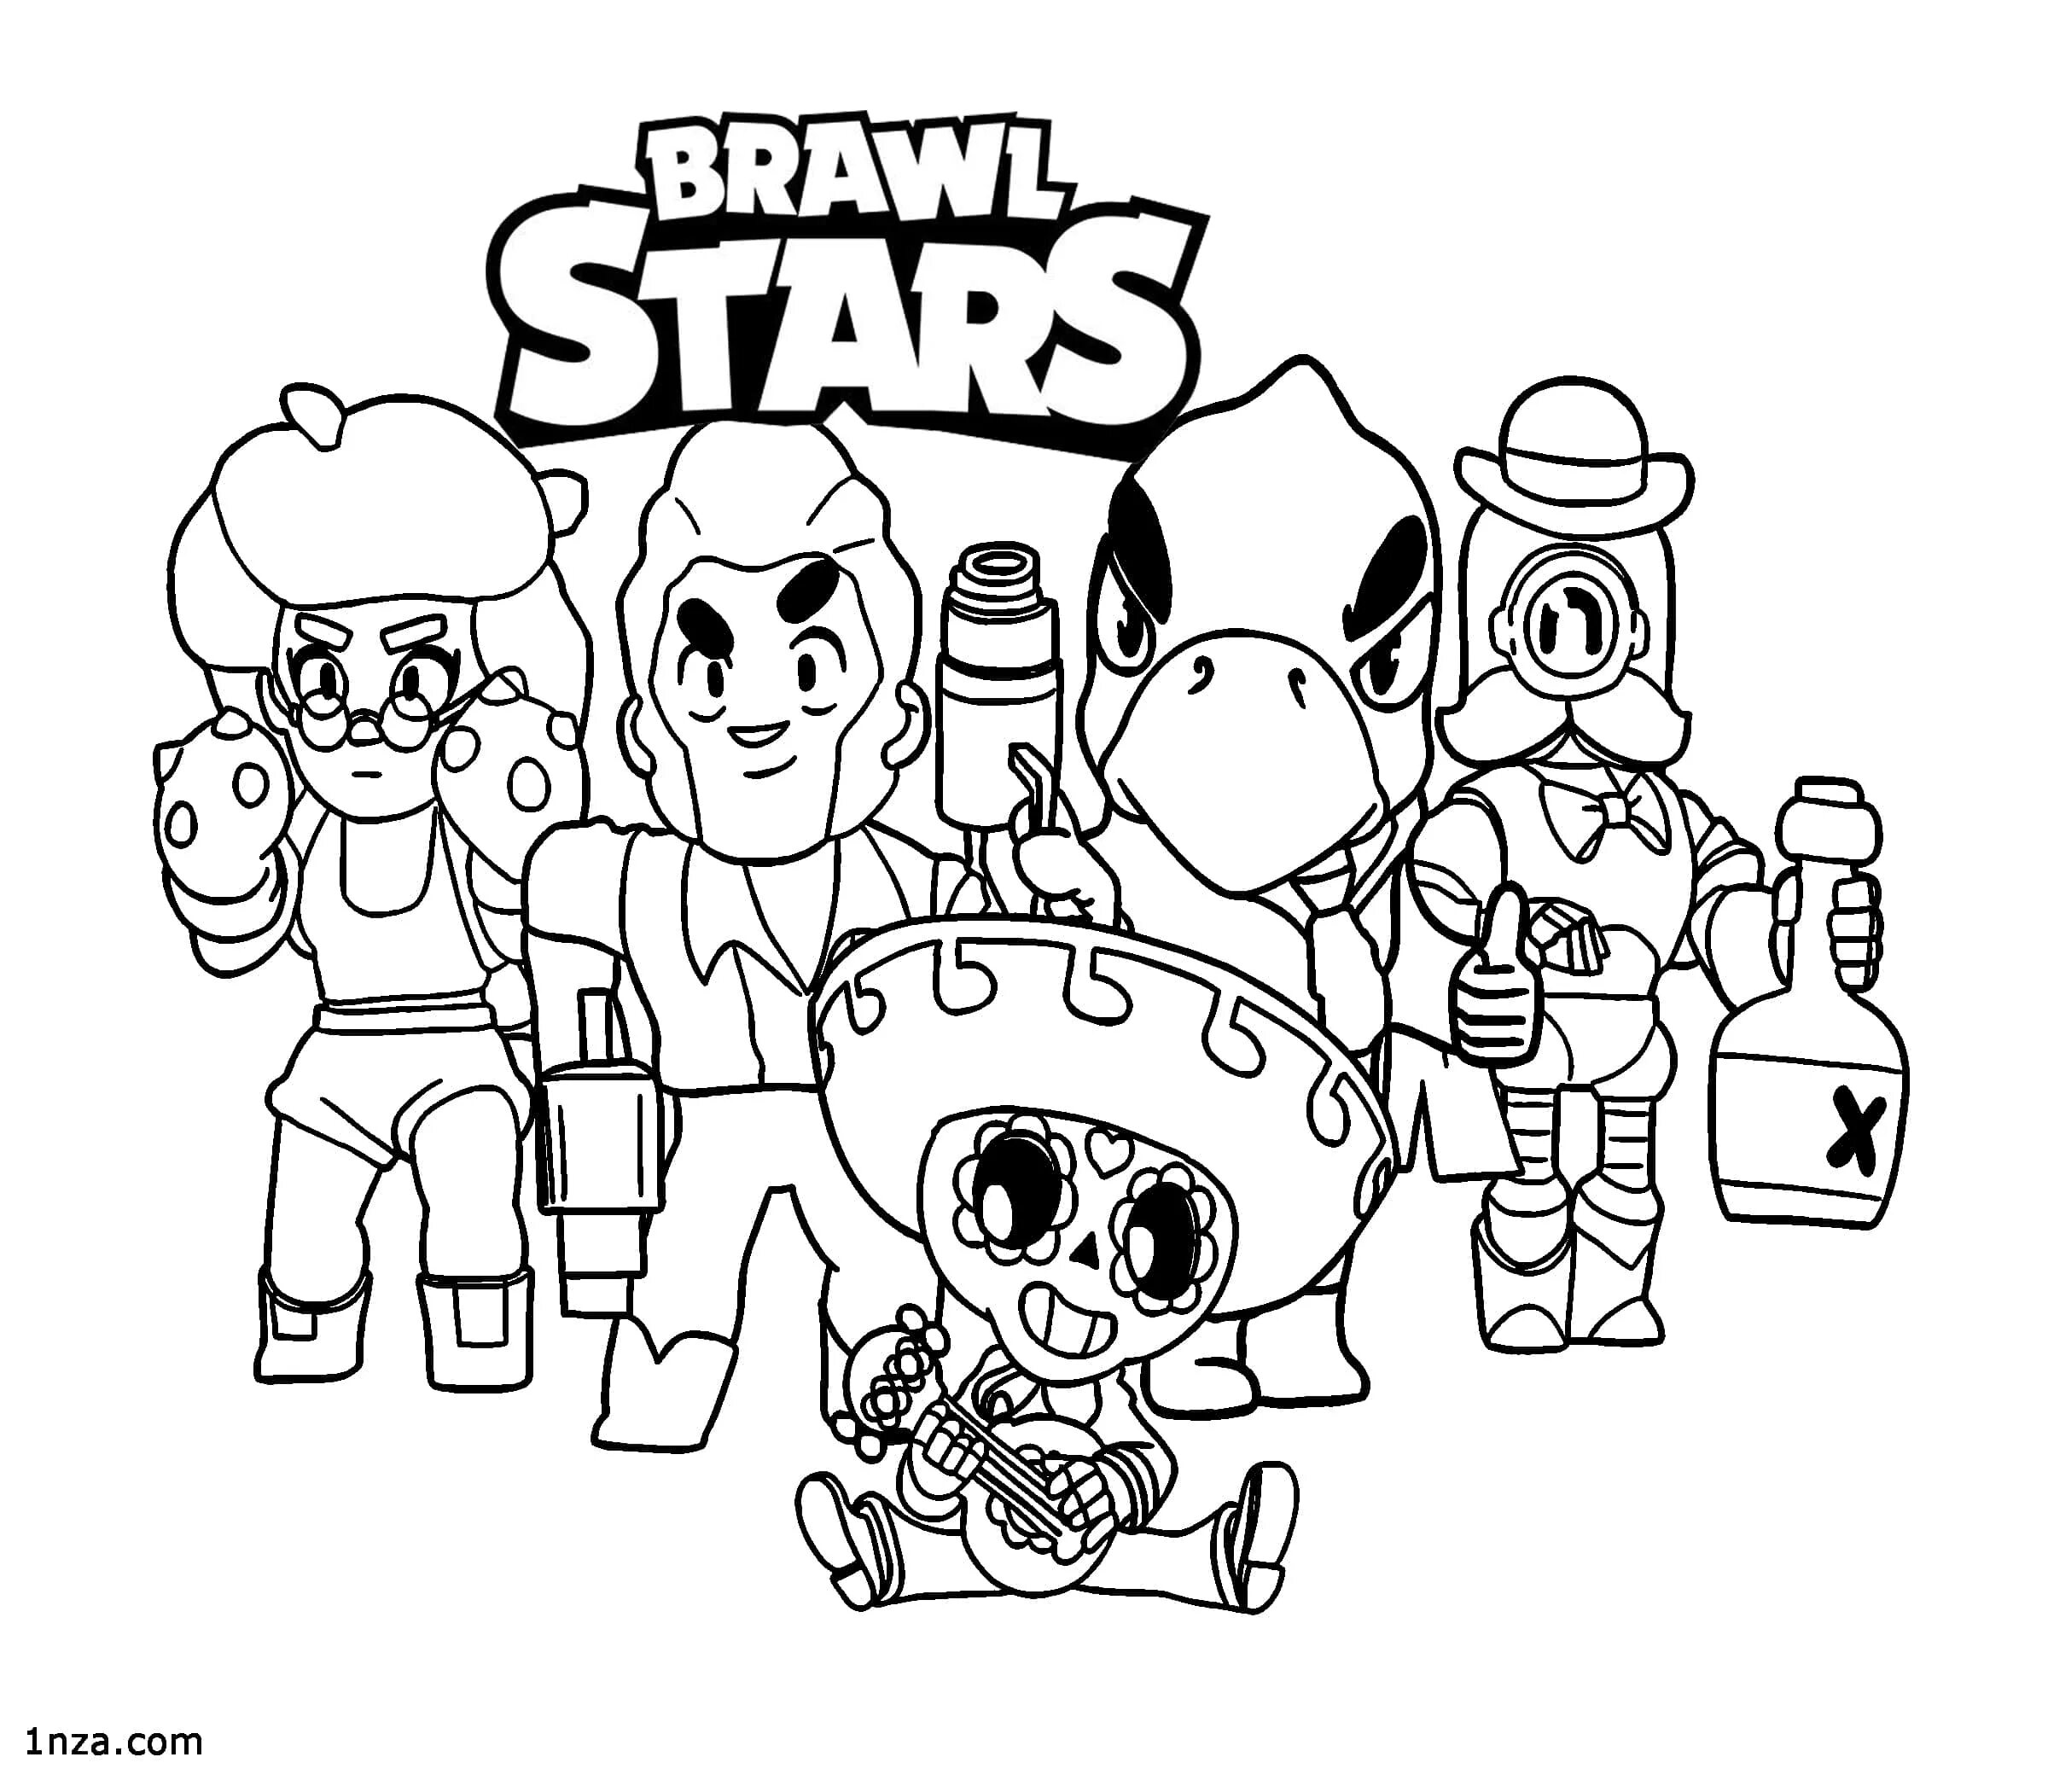 Bravo stars blooming coloring page